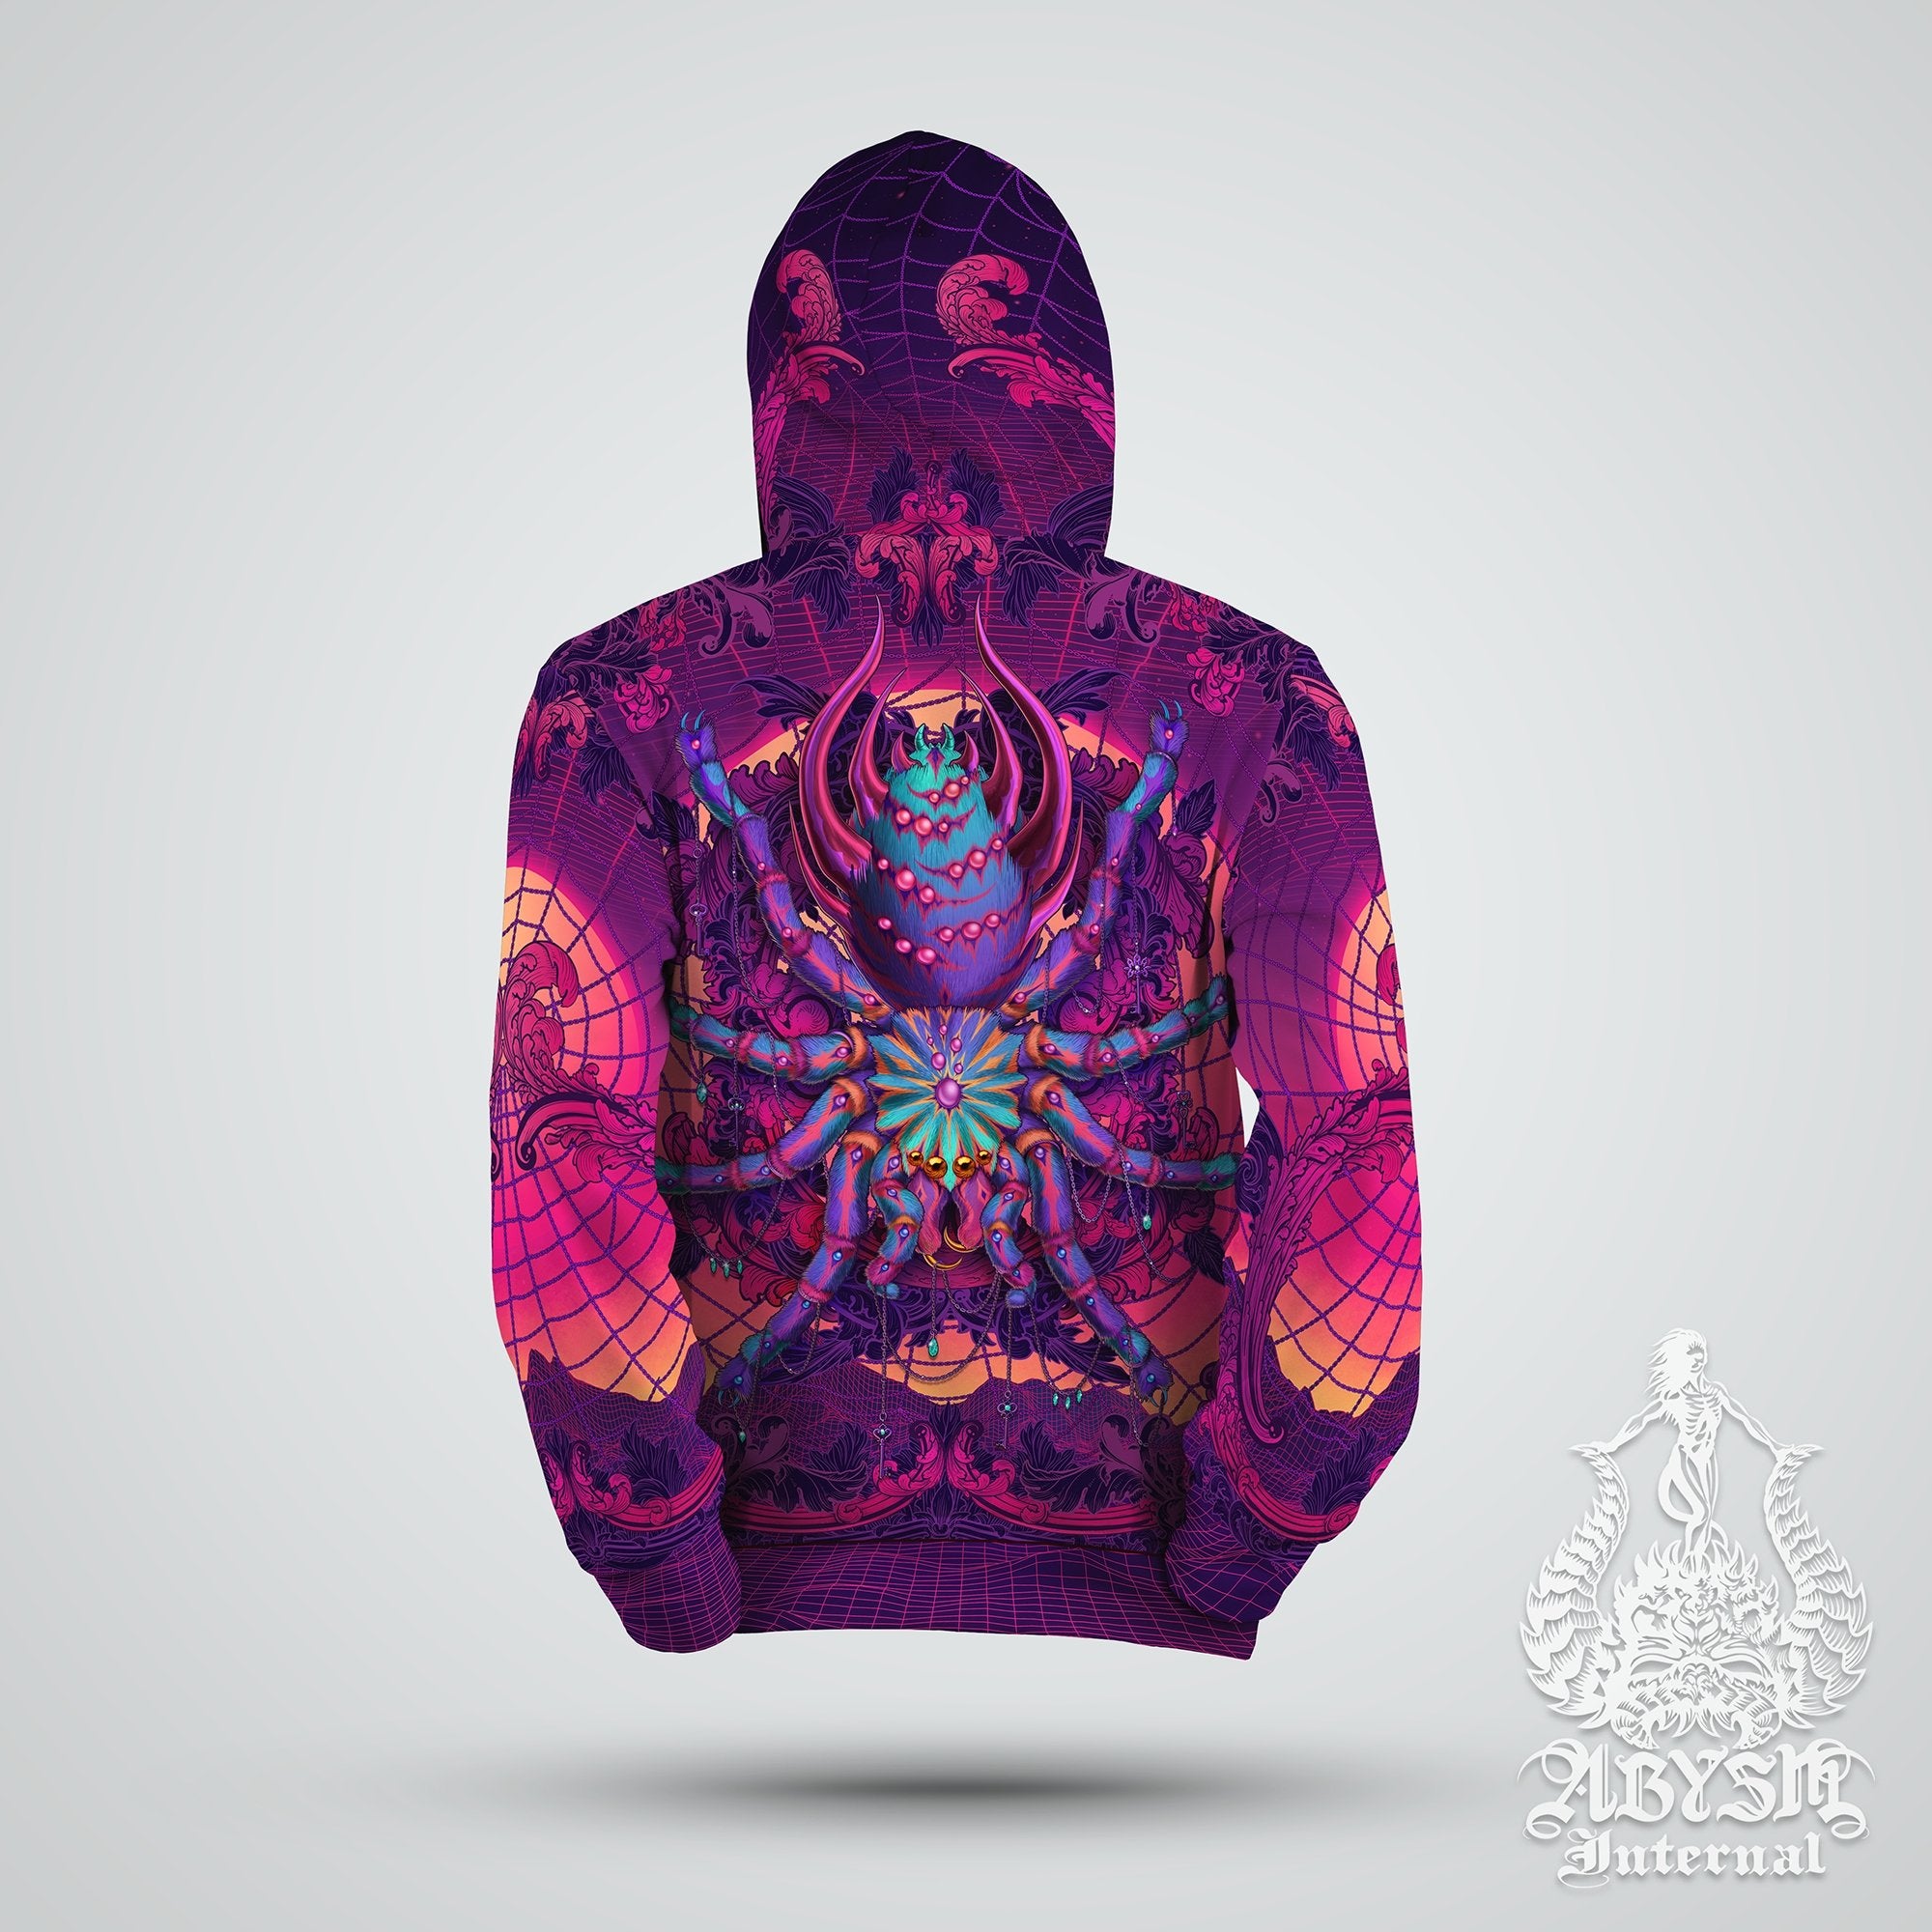 Vaporwave Hoodie, Retrowave Outfit, Trippy Streetwear, Synthwave Festival, 80s Psychedelic Alternative Clothing, Unisex - Spider - Abysm Internal